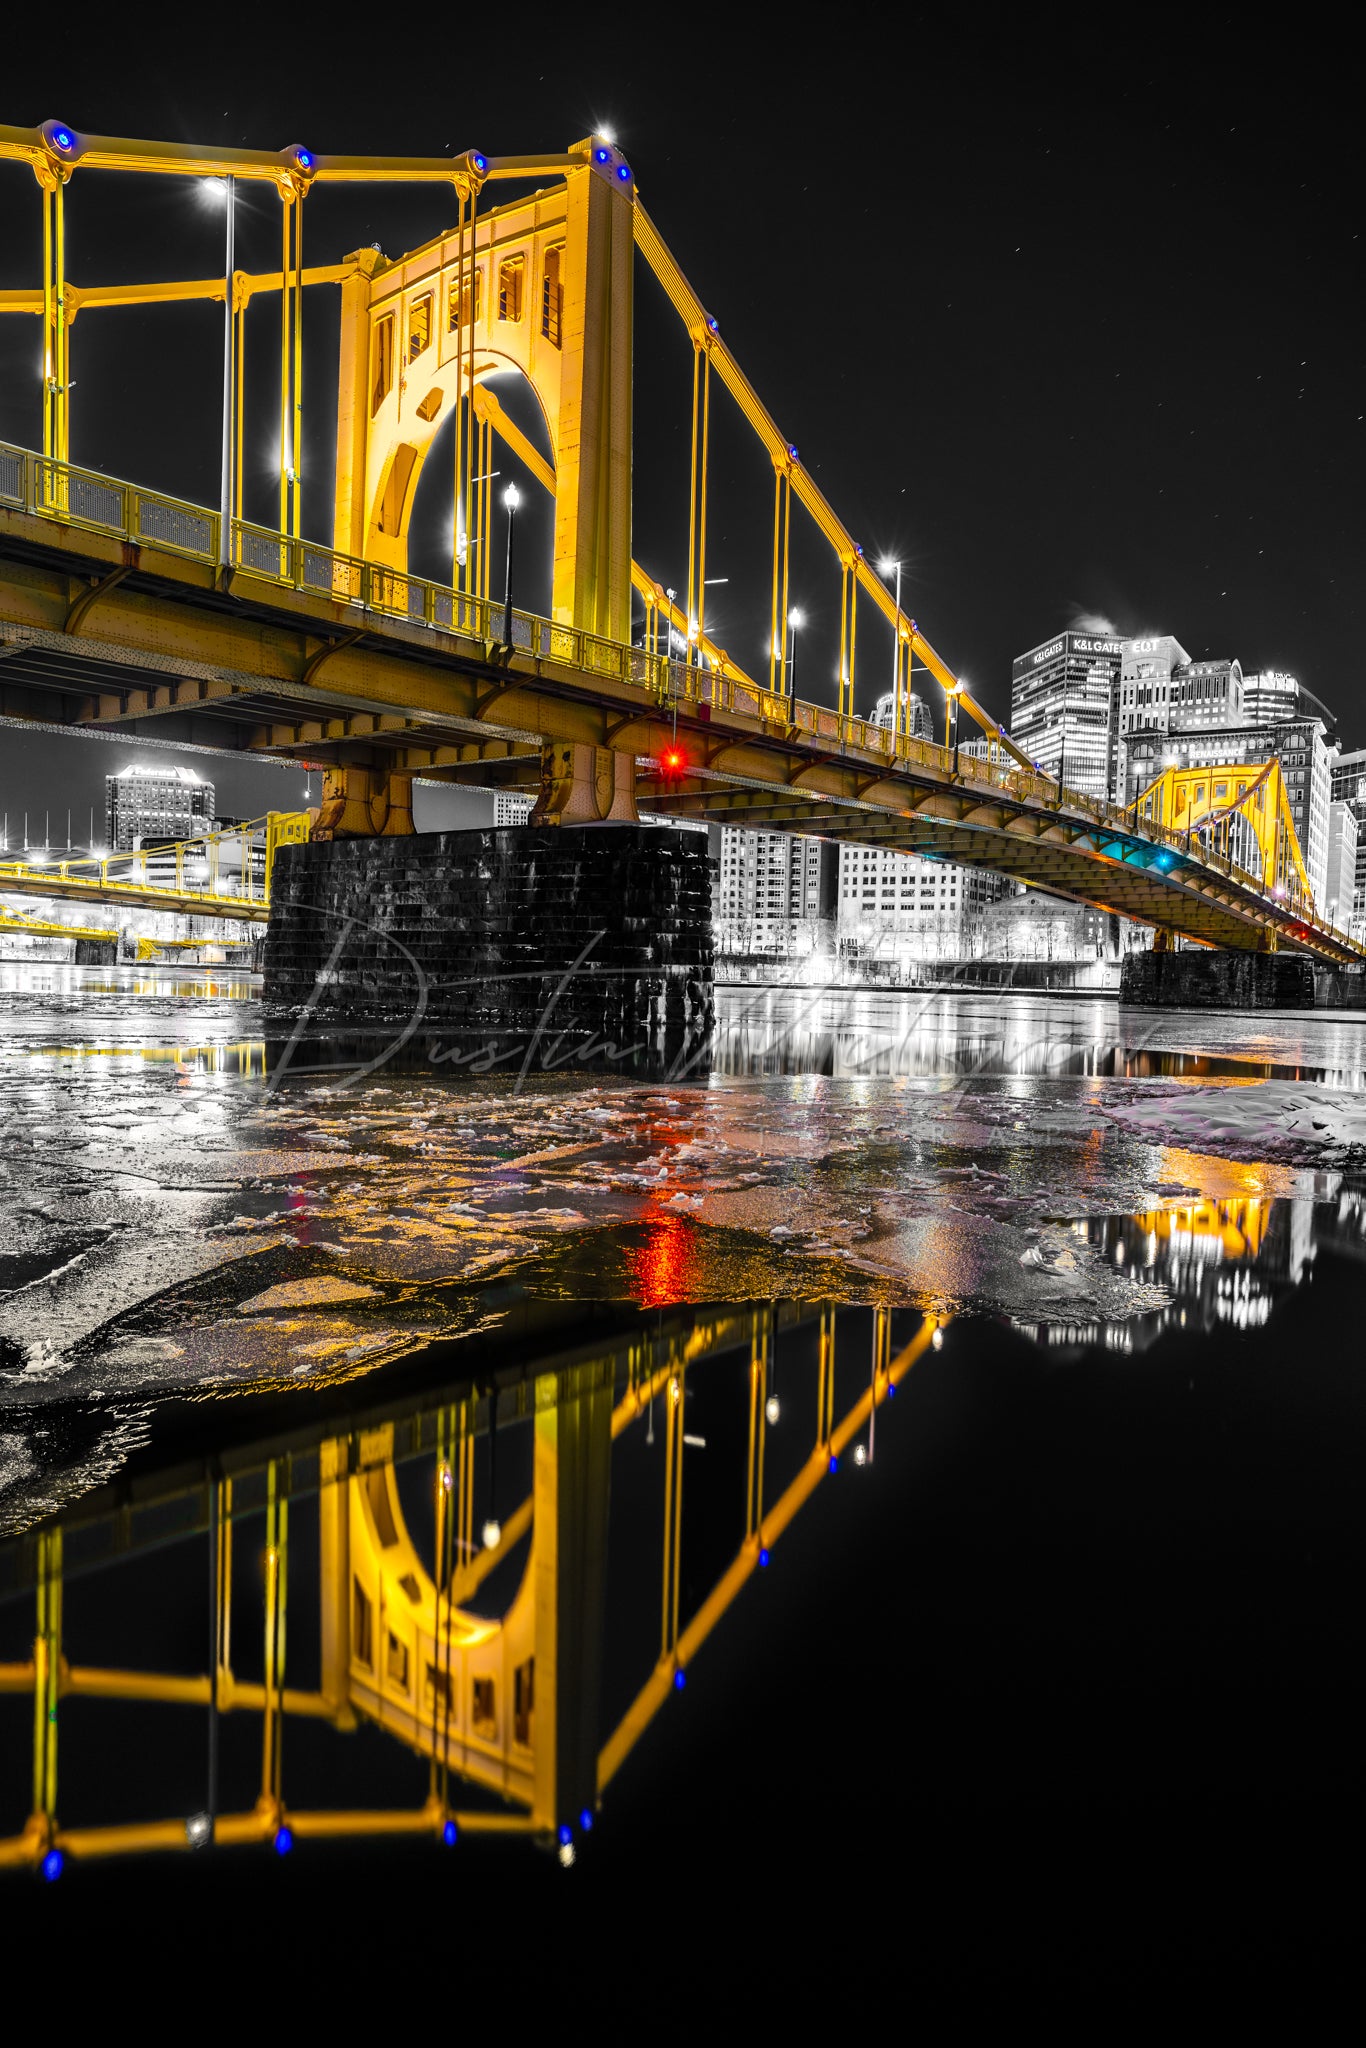 Black & Gold Clemente Bridge with Icy River